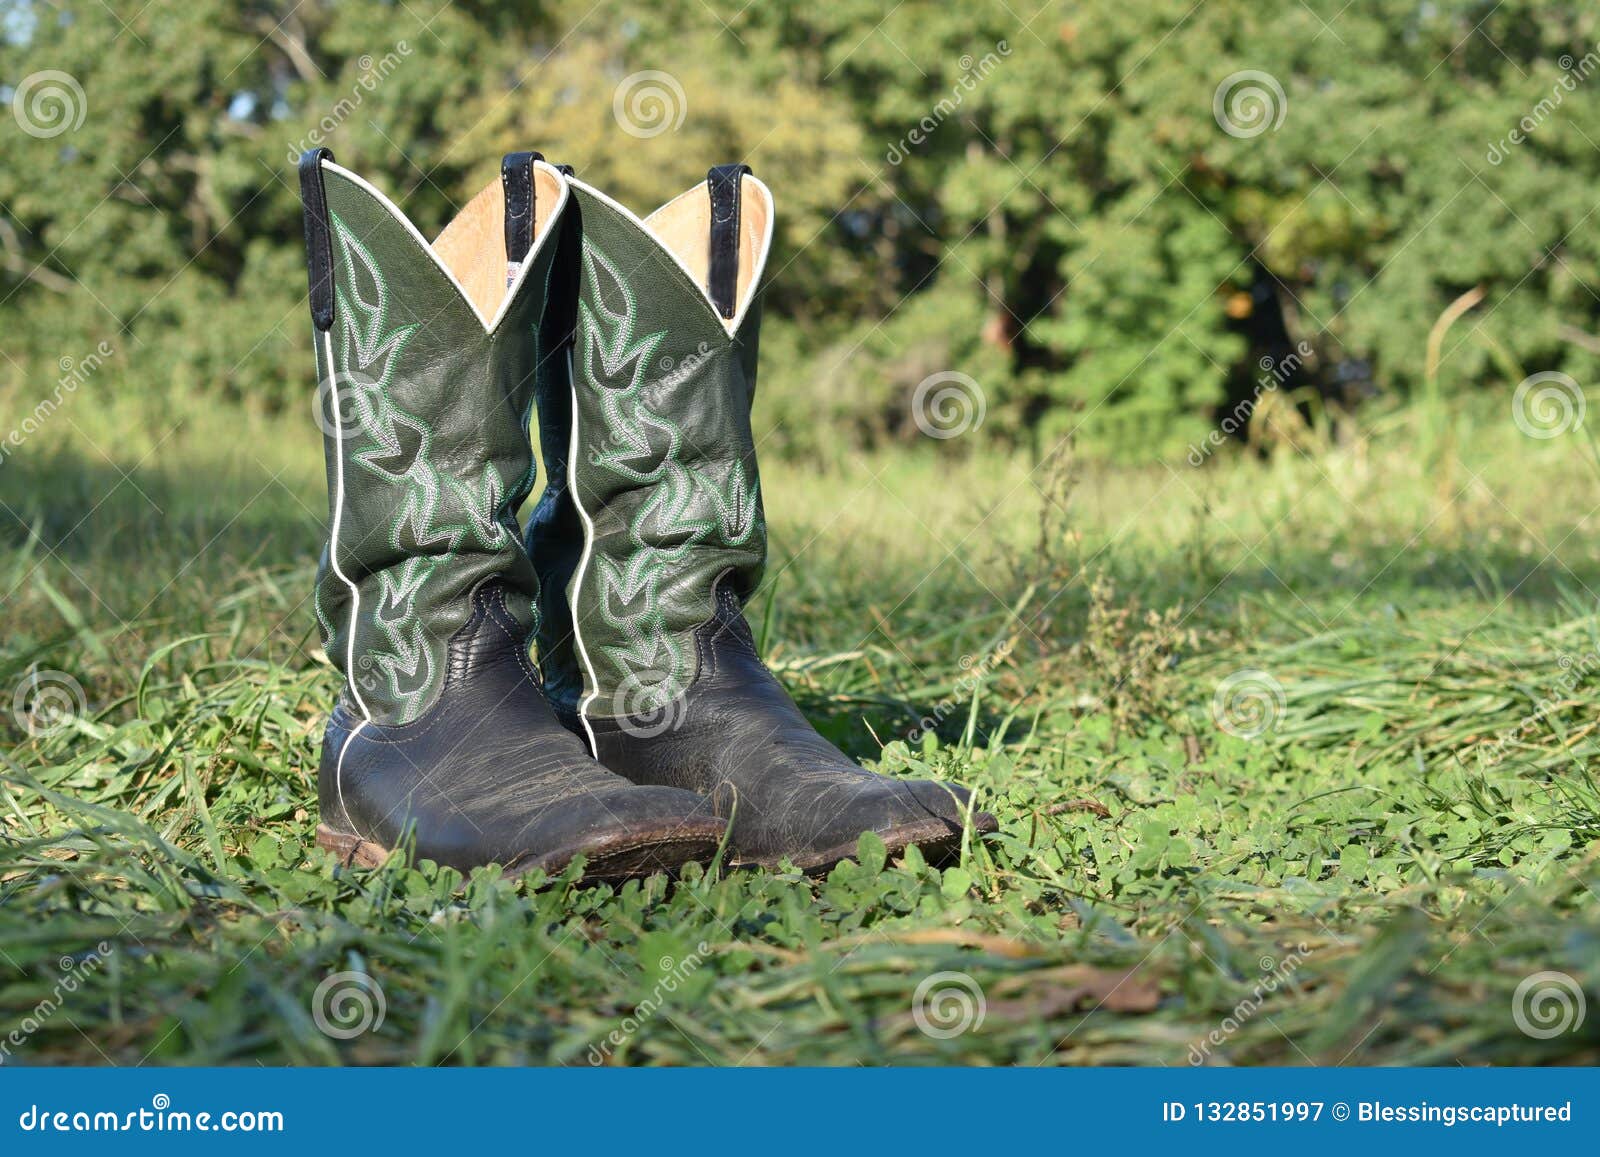 Green Cowboy Boots in the Grass Stock Image - Image of blurry, pair ...